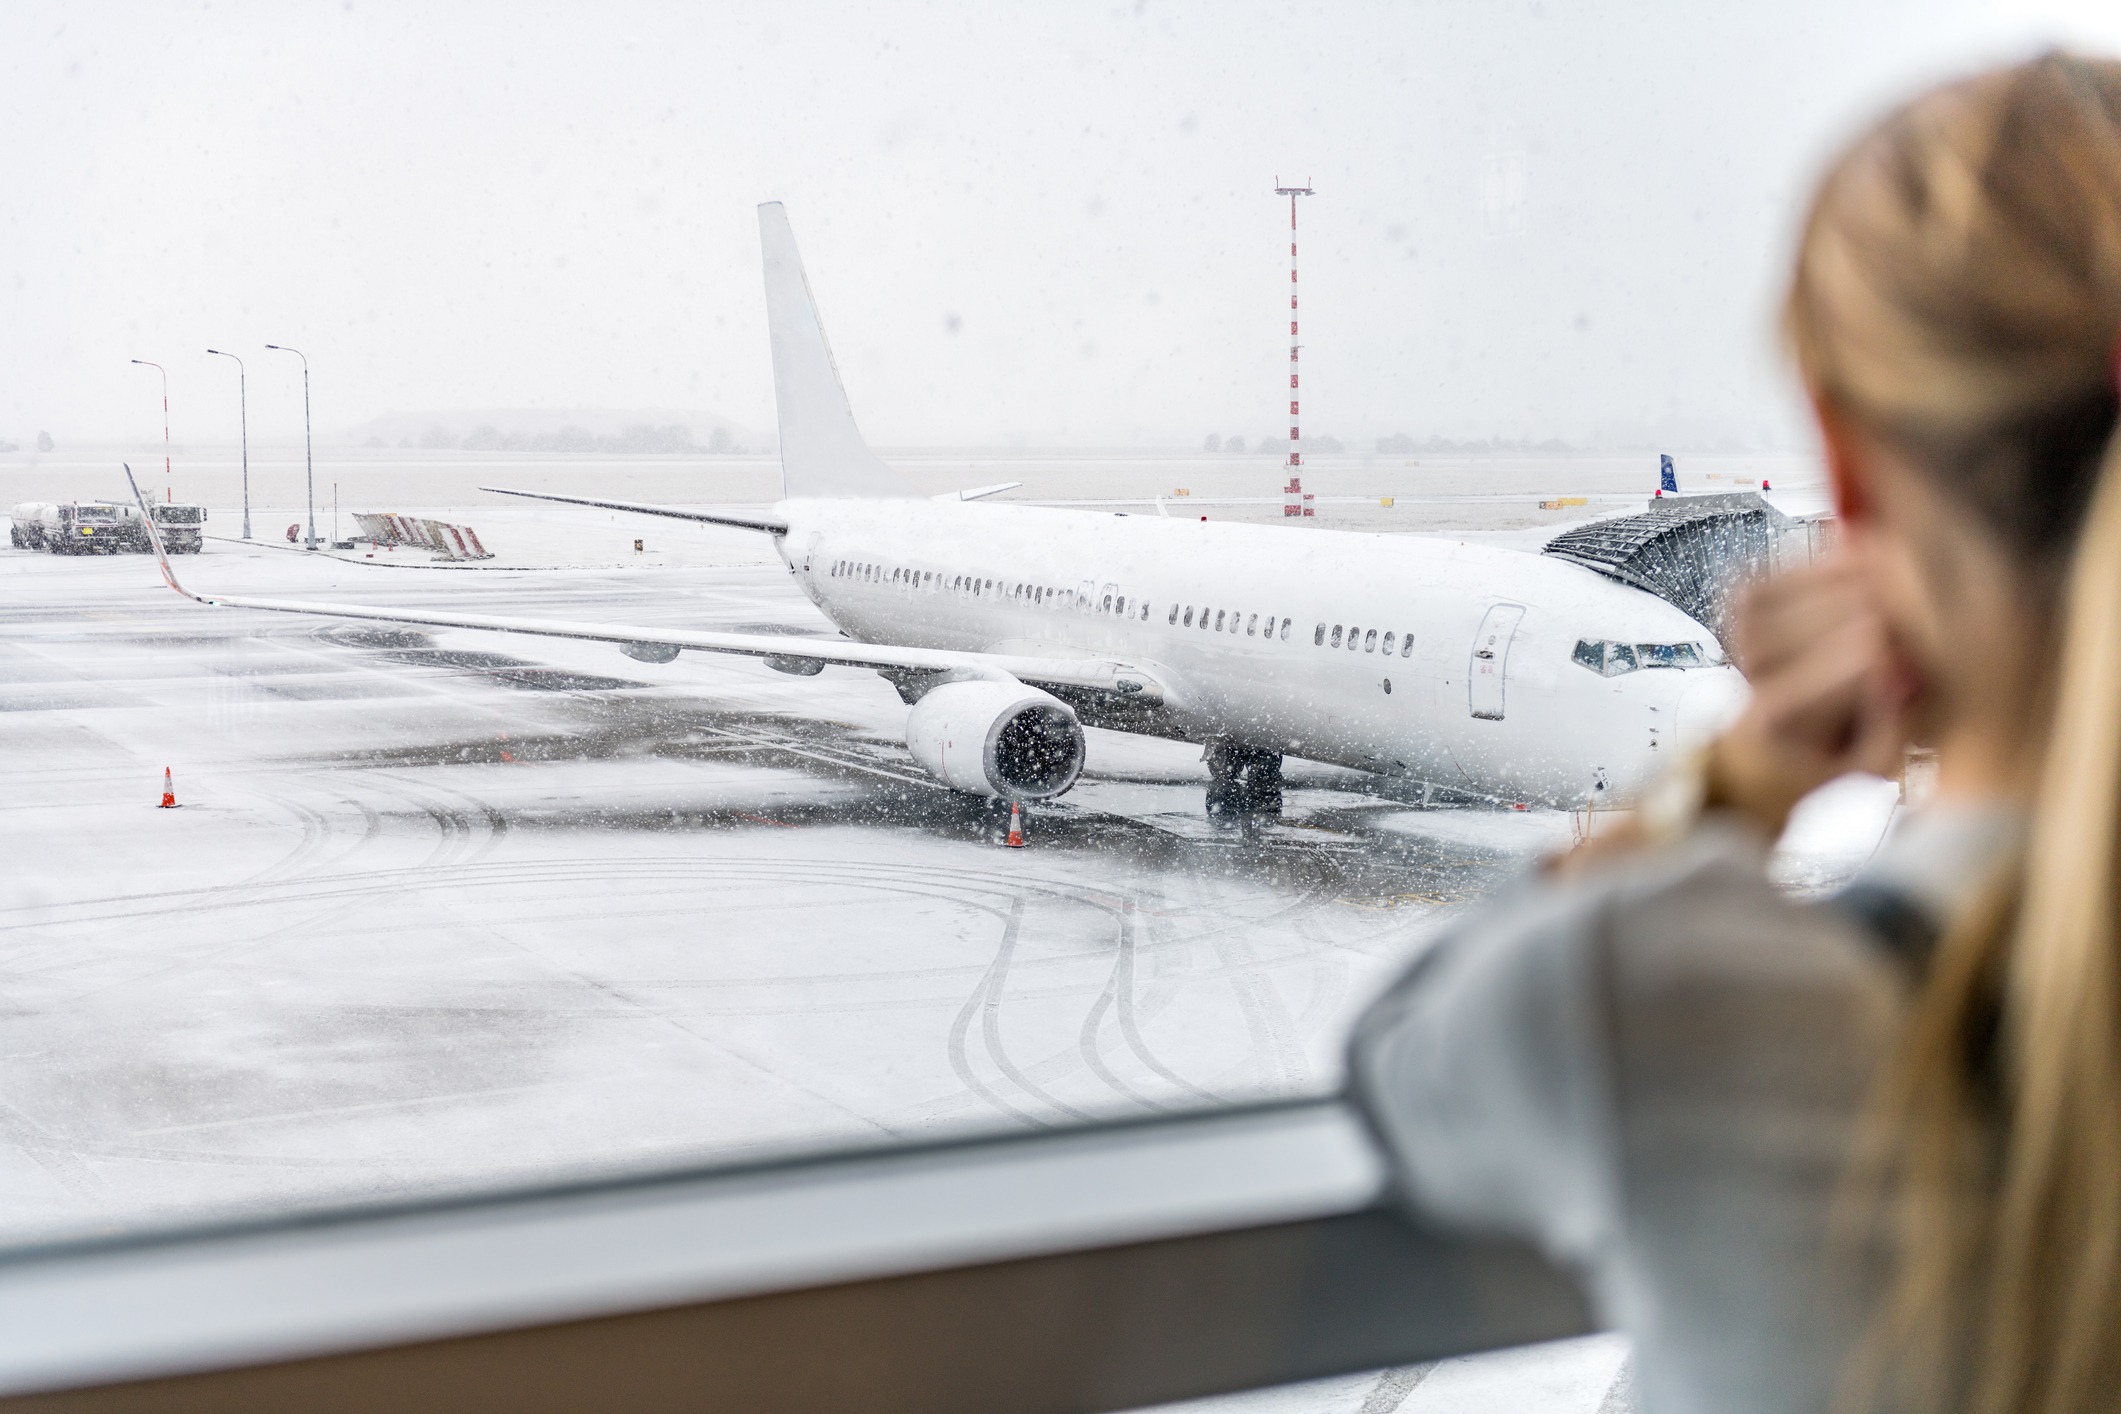 A woman in the foreground looks out of the window at an airplane parked at a gate.